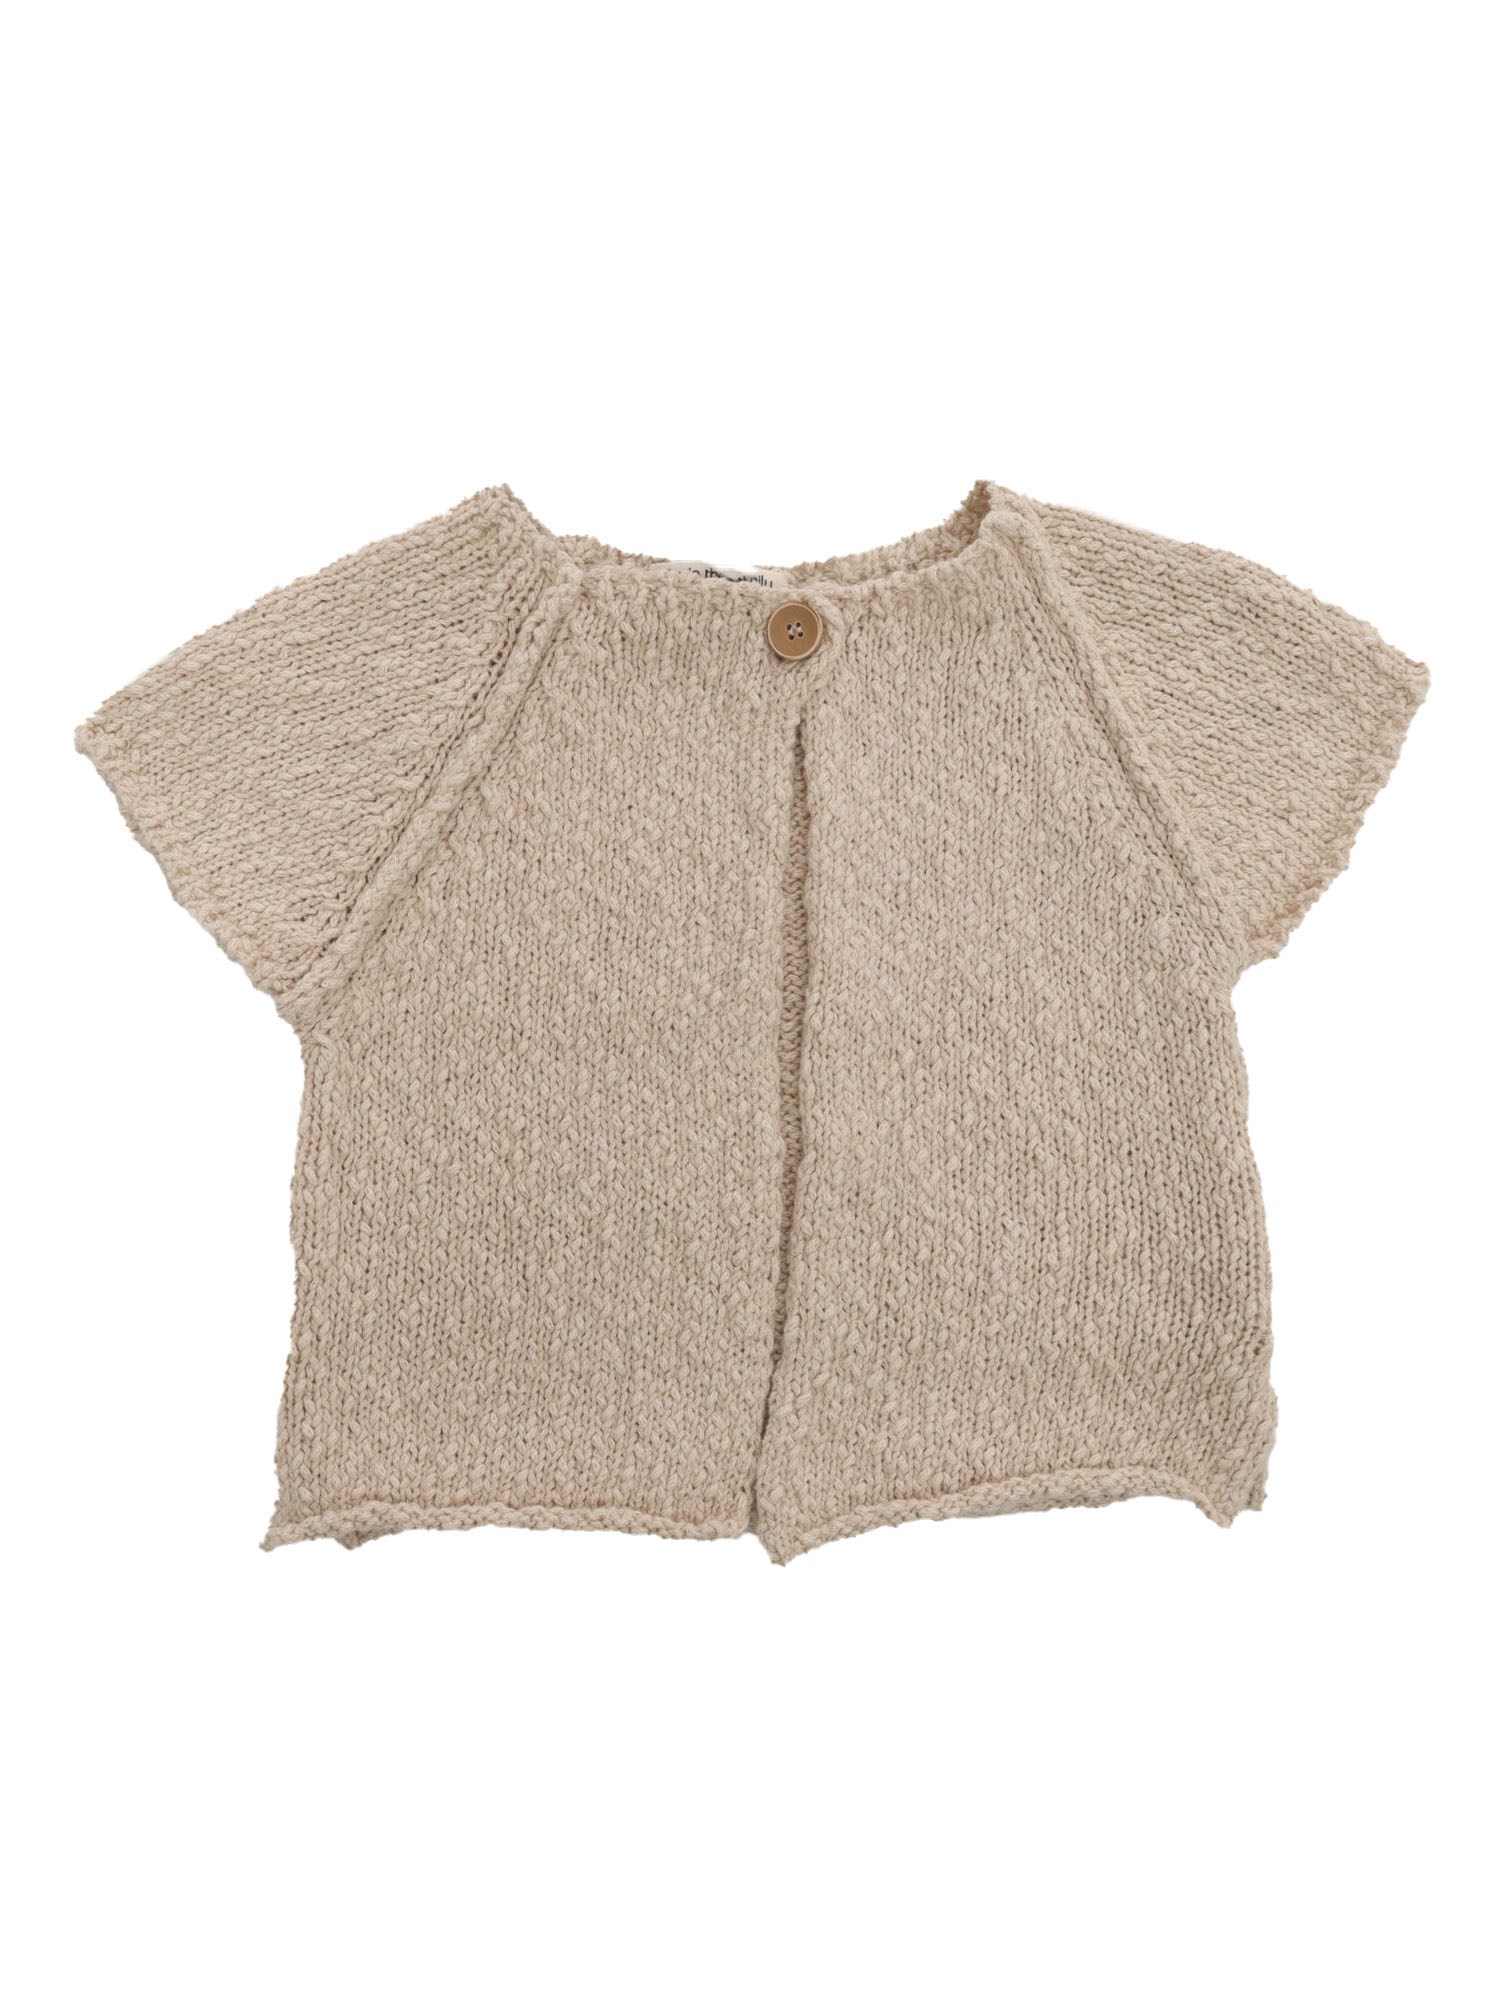 One More In The Family Sleevless Sweater In Beige